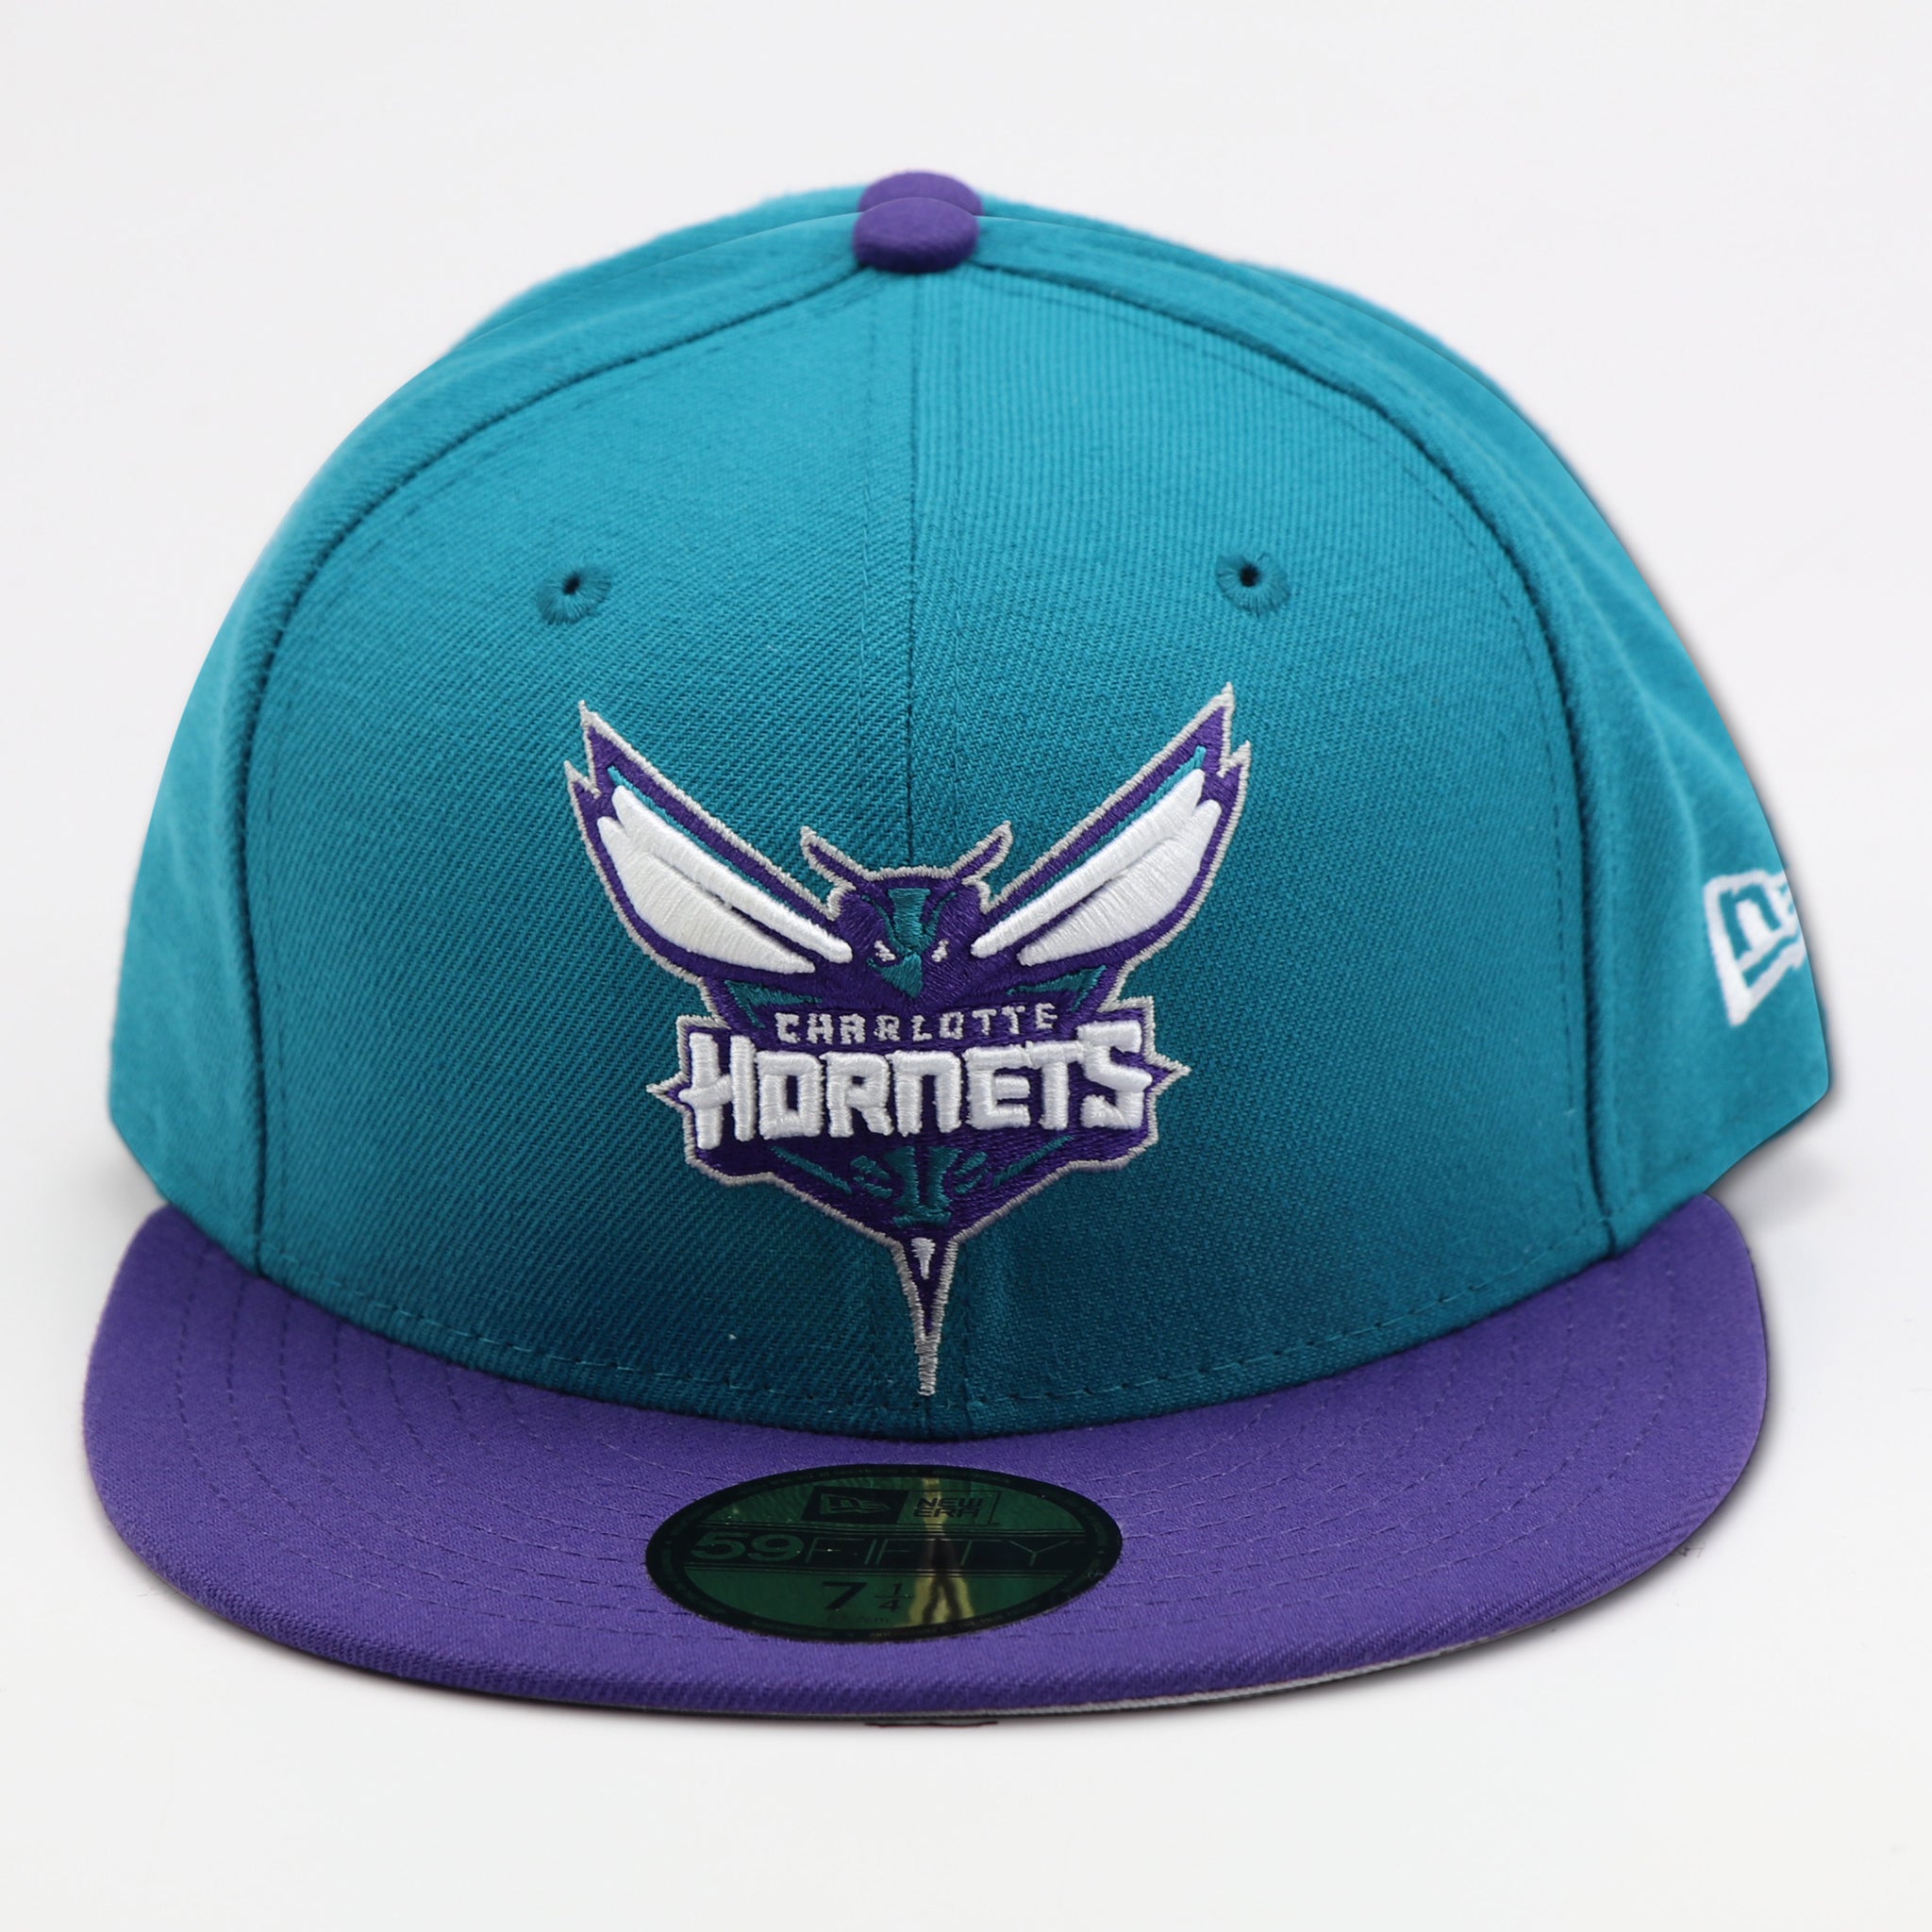 CHARLOTTE HORNETS NEW ERA 59FIFTY FITTED